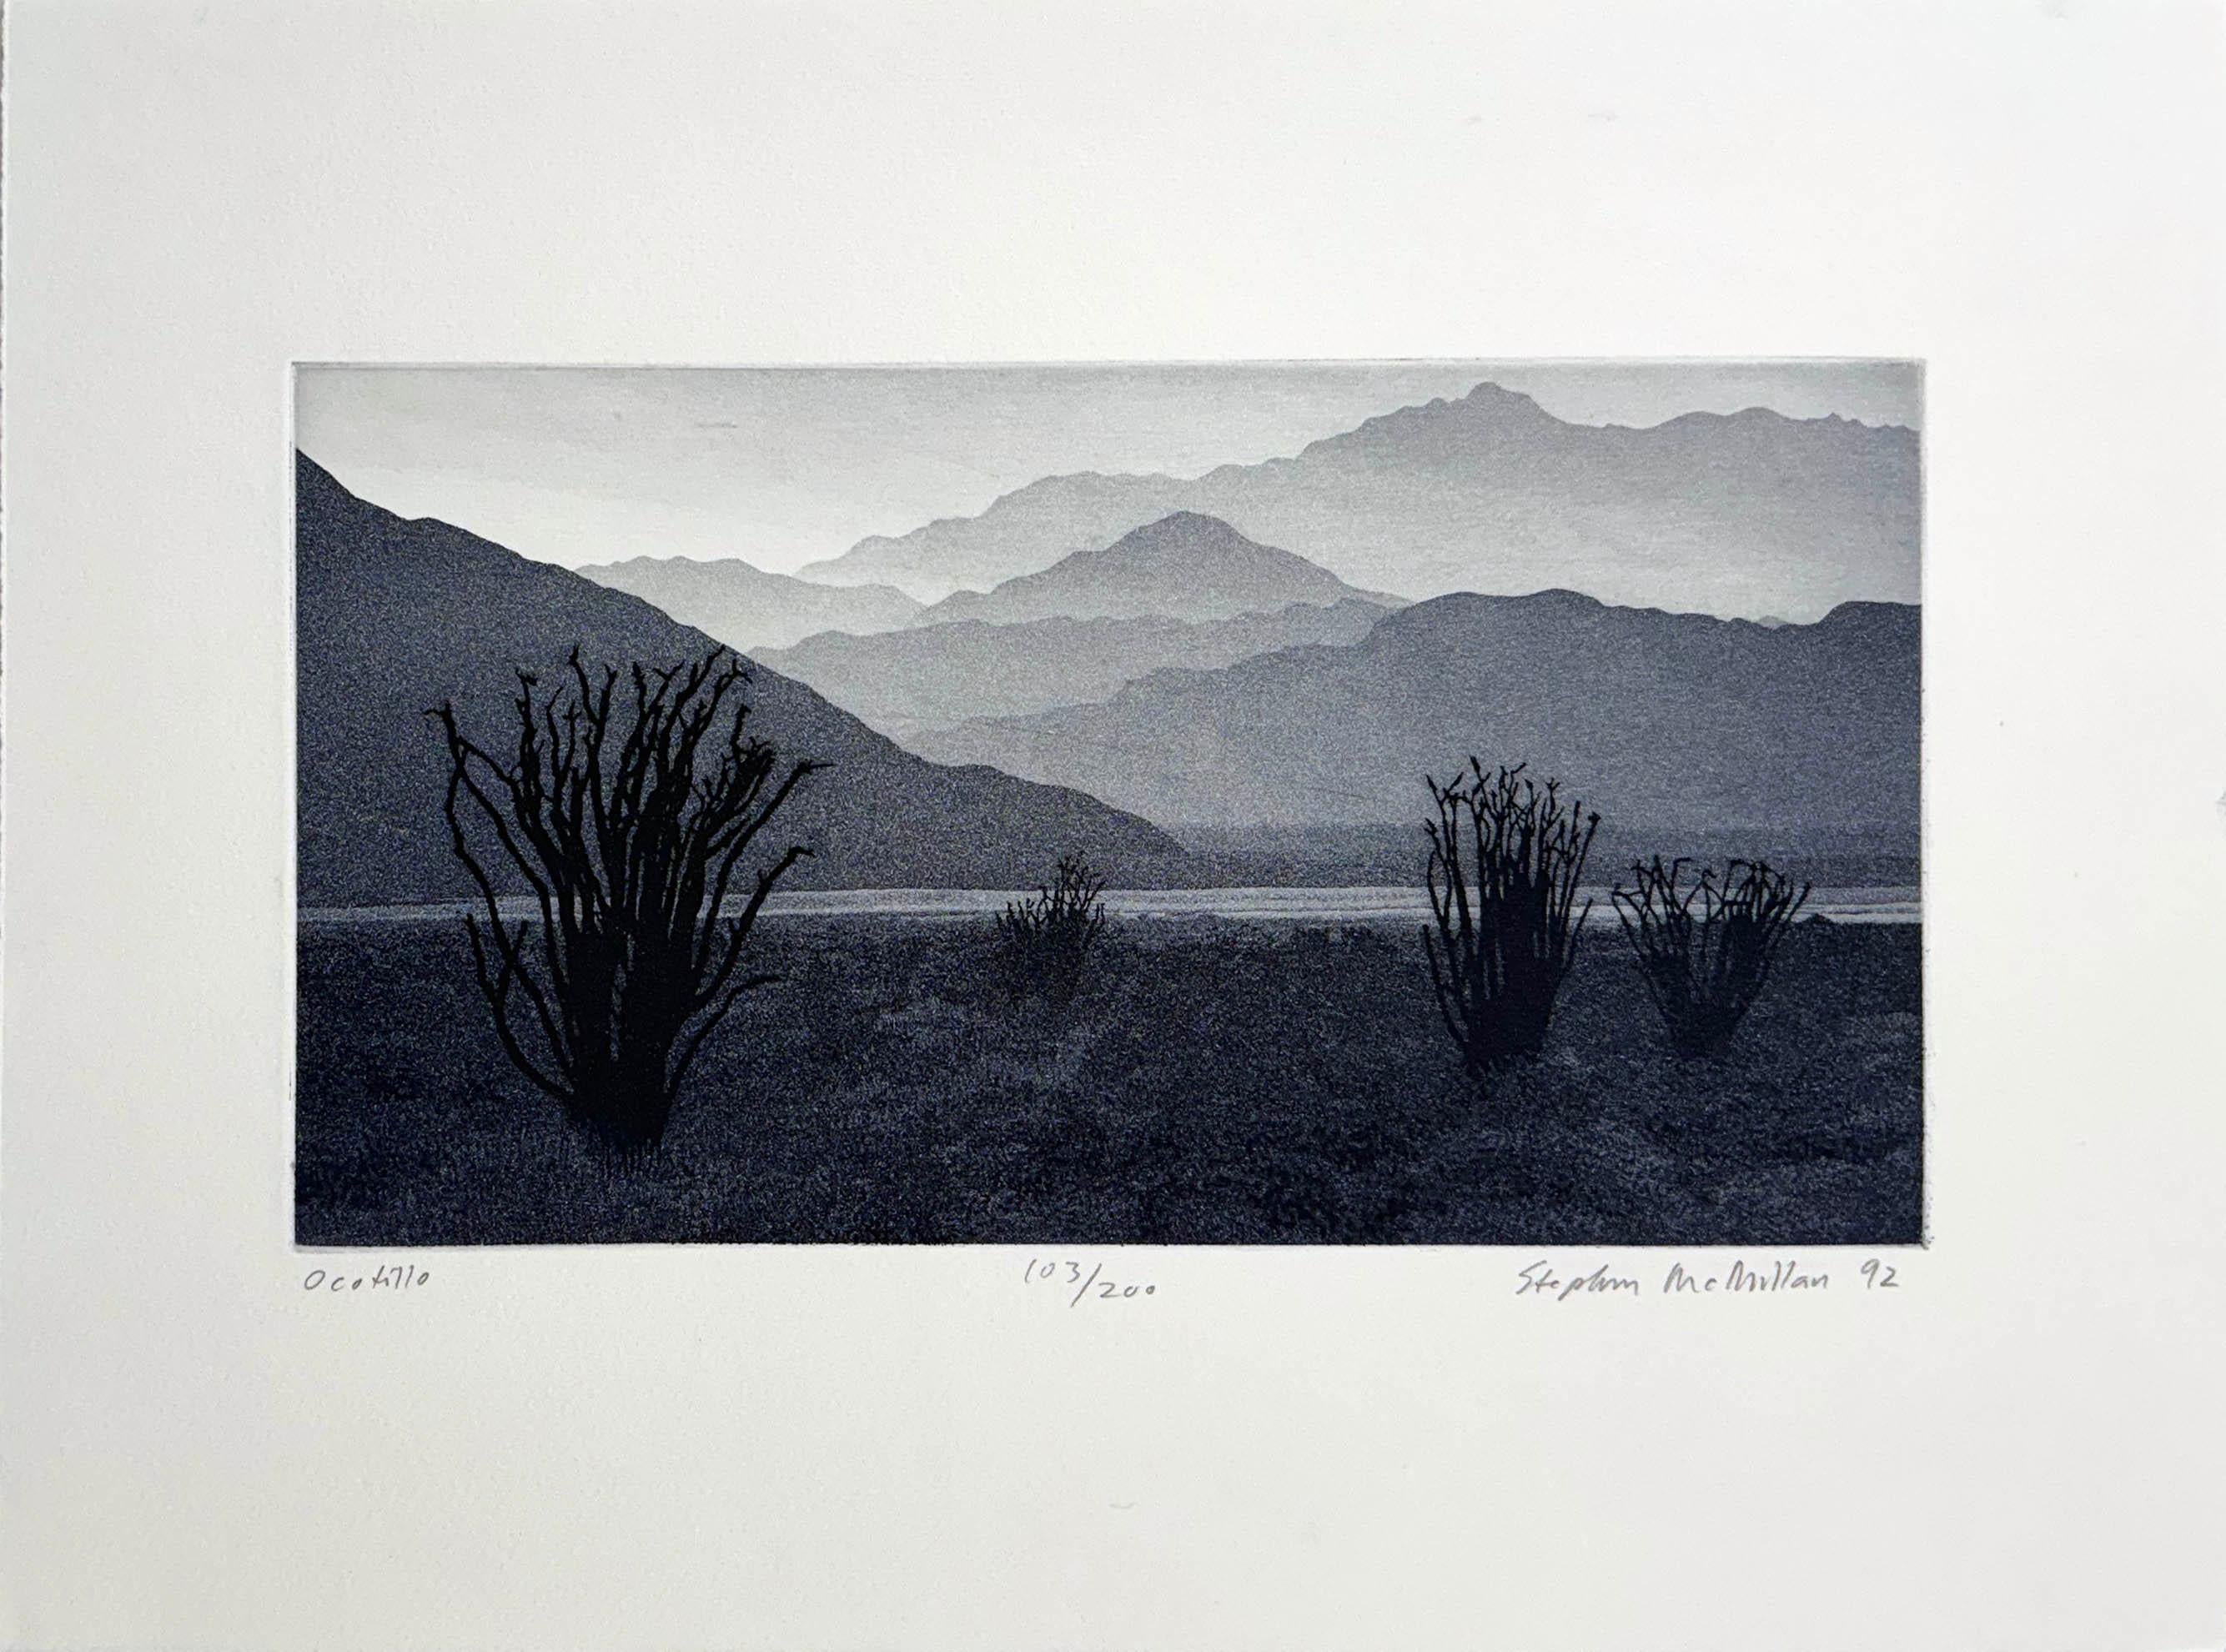 Signed, titled and numbered by the artist.

A view of ocotillo cactus, based on a view near Clark Dry Lake, Anza Borrego Desert State Park, California.

Born in Berkeley, California, on December 21, 1949, he was raised in a home that had a sweeping